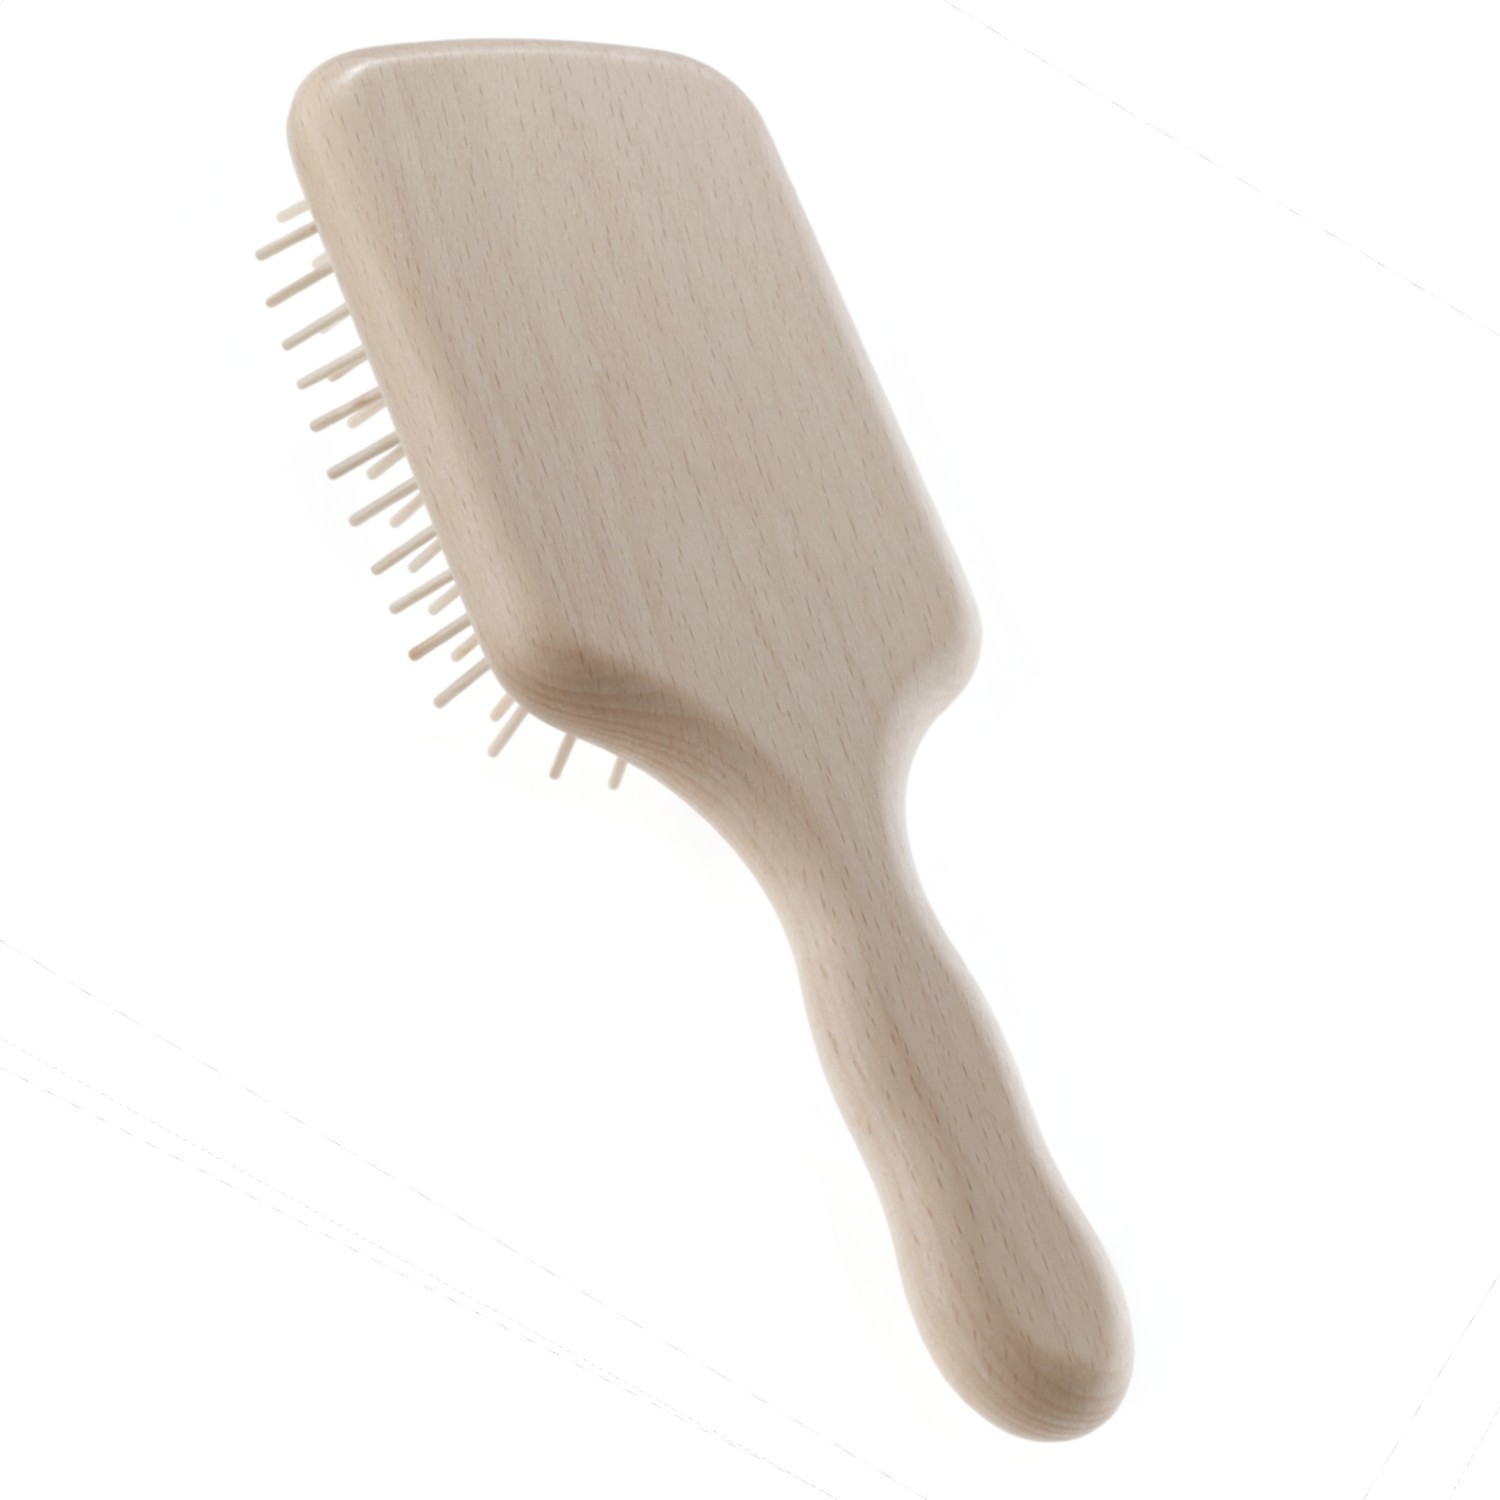 ACCA KAPPA Beech Wood Paddle Pneumatic Brush with Wooden Pins